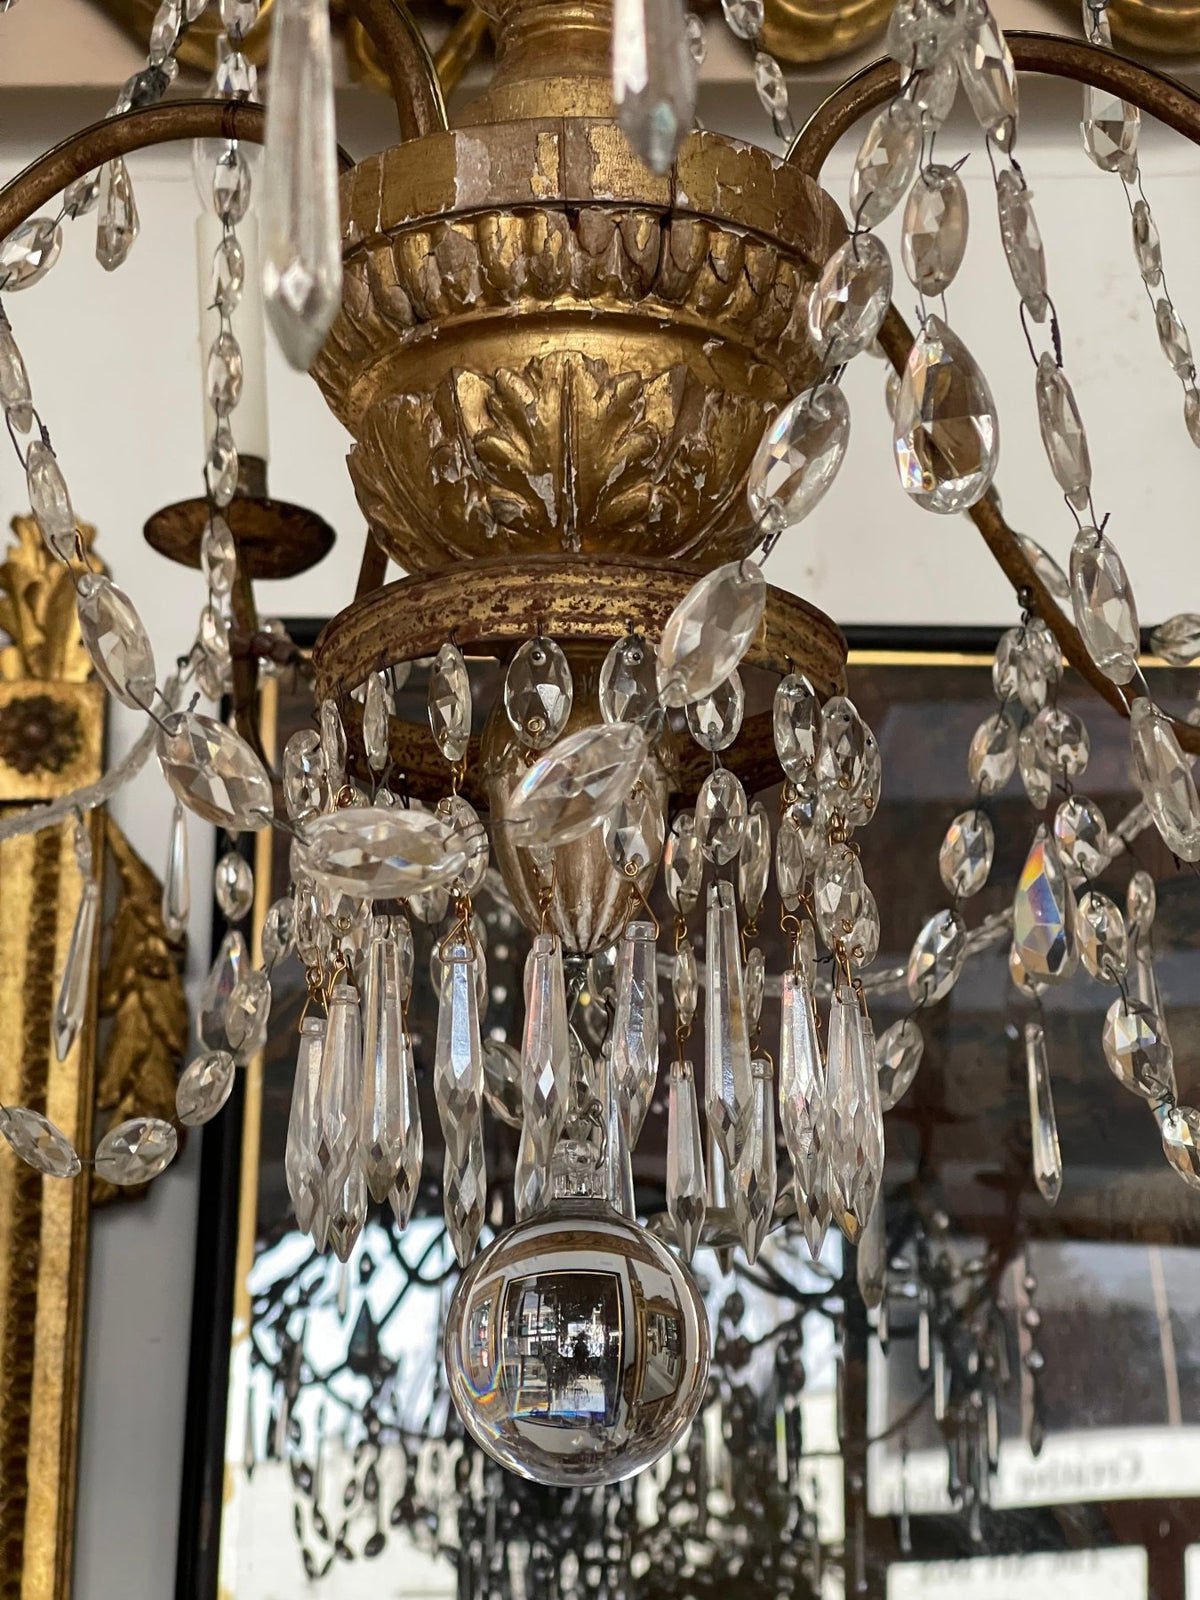 Late 18th Century - Early 19th Century Six Light Italian Genovese Chandelier - Helen Storey Antiques